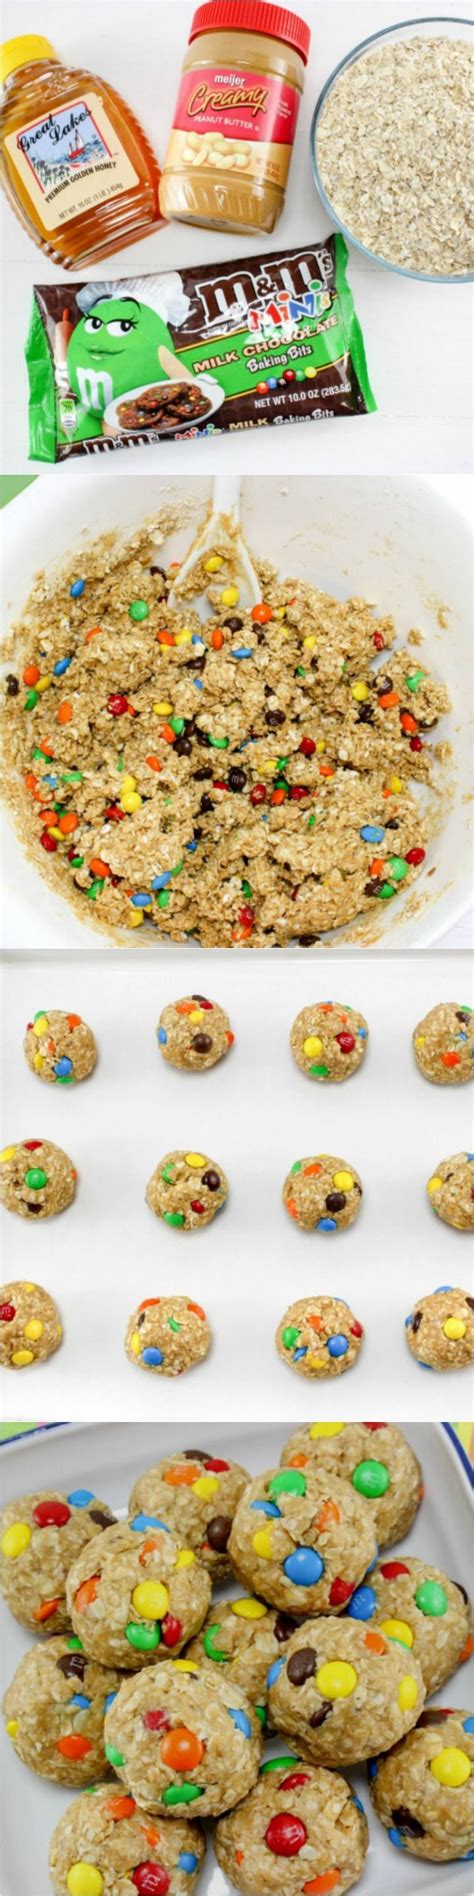 no bake monster cookie oatmeal balls the perfect after